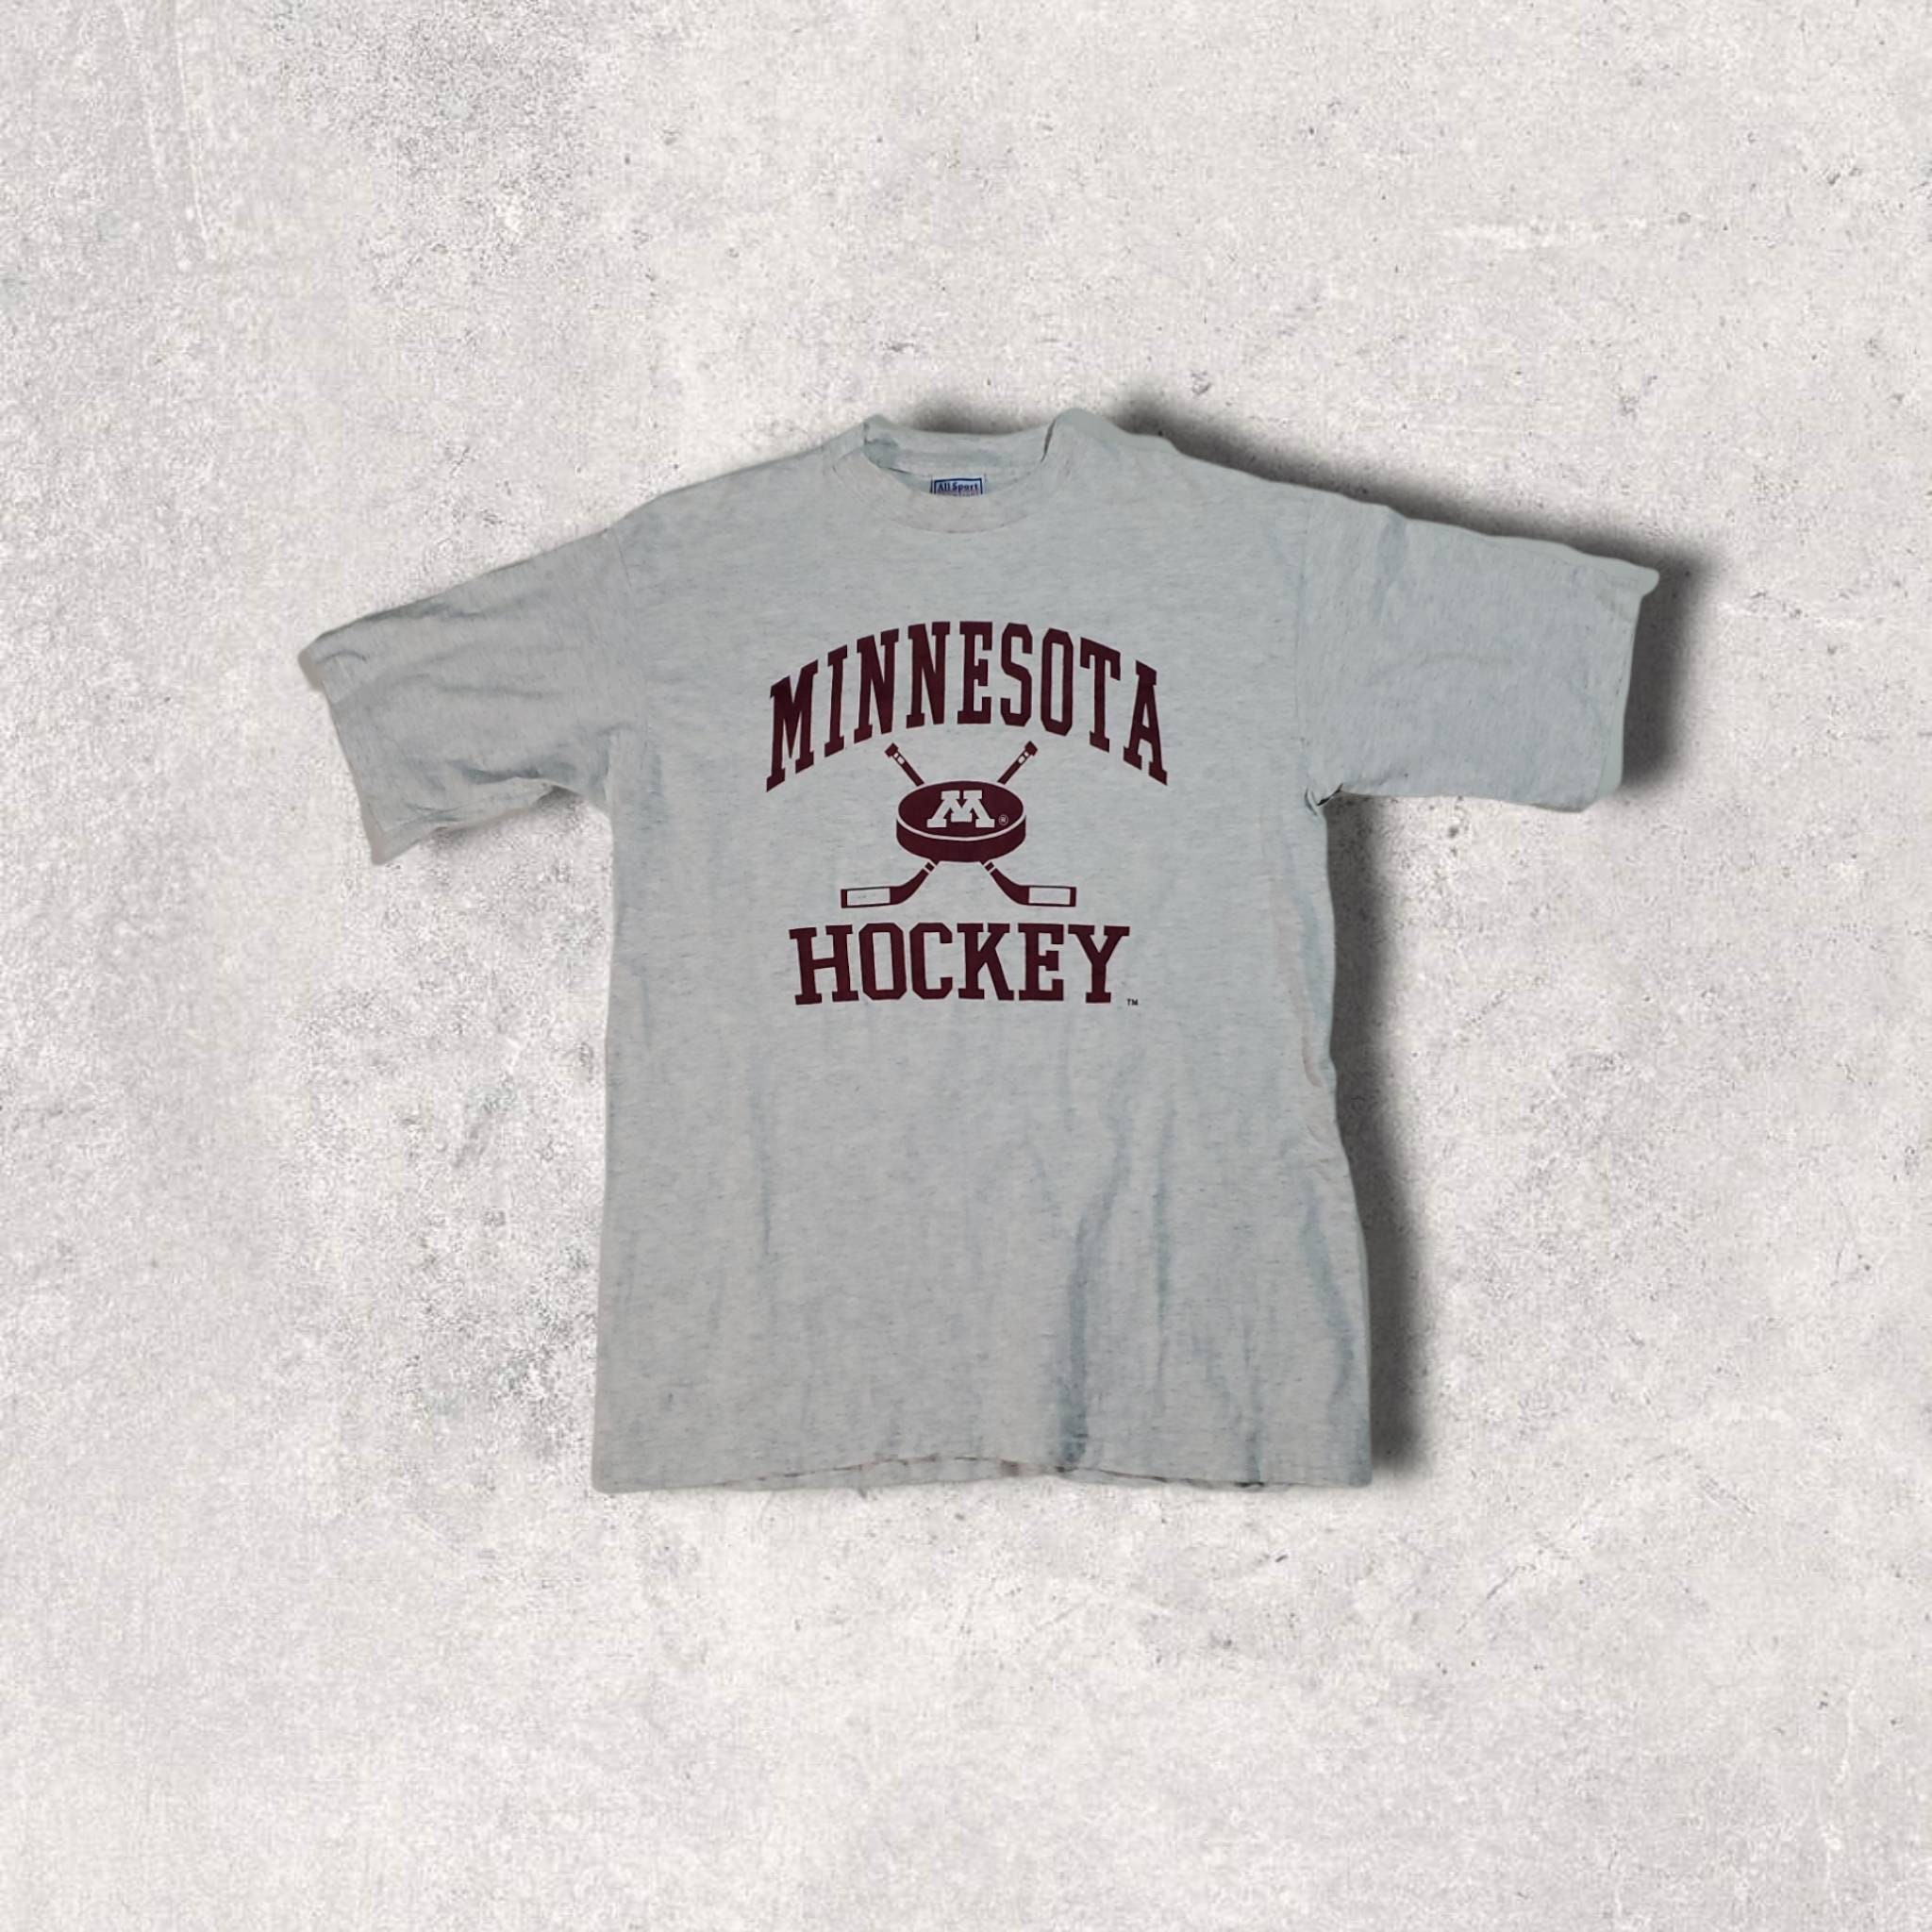 MINNESOTA GOLDEN GOPHERS men's XXL maroon Colosseum Hockey Jersey -  clothing & accessories - by owner - apparel sale 